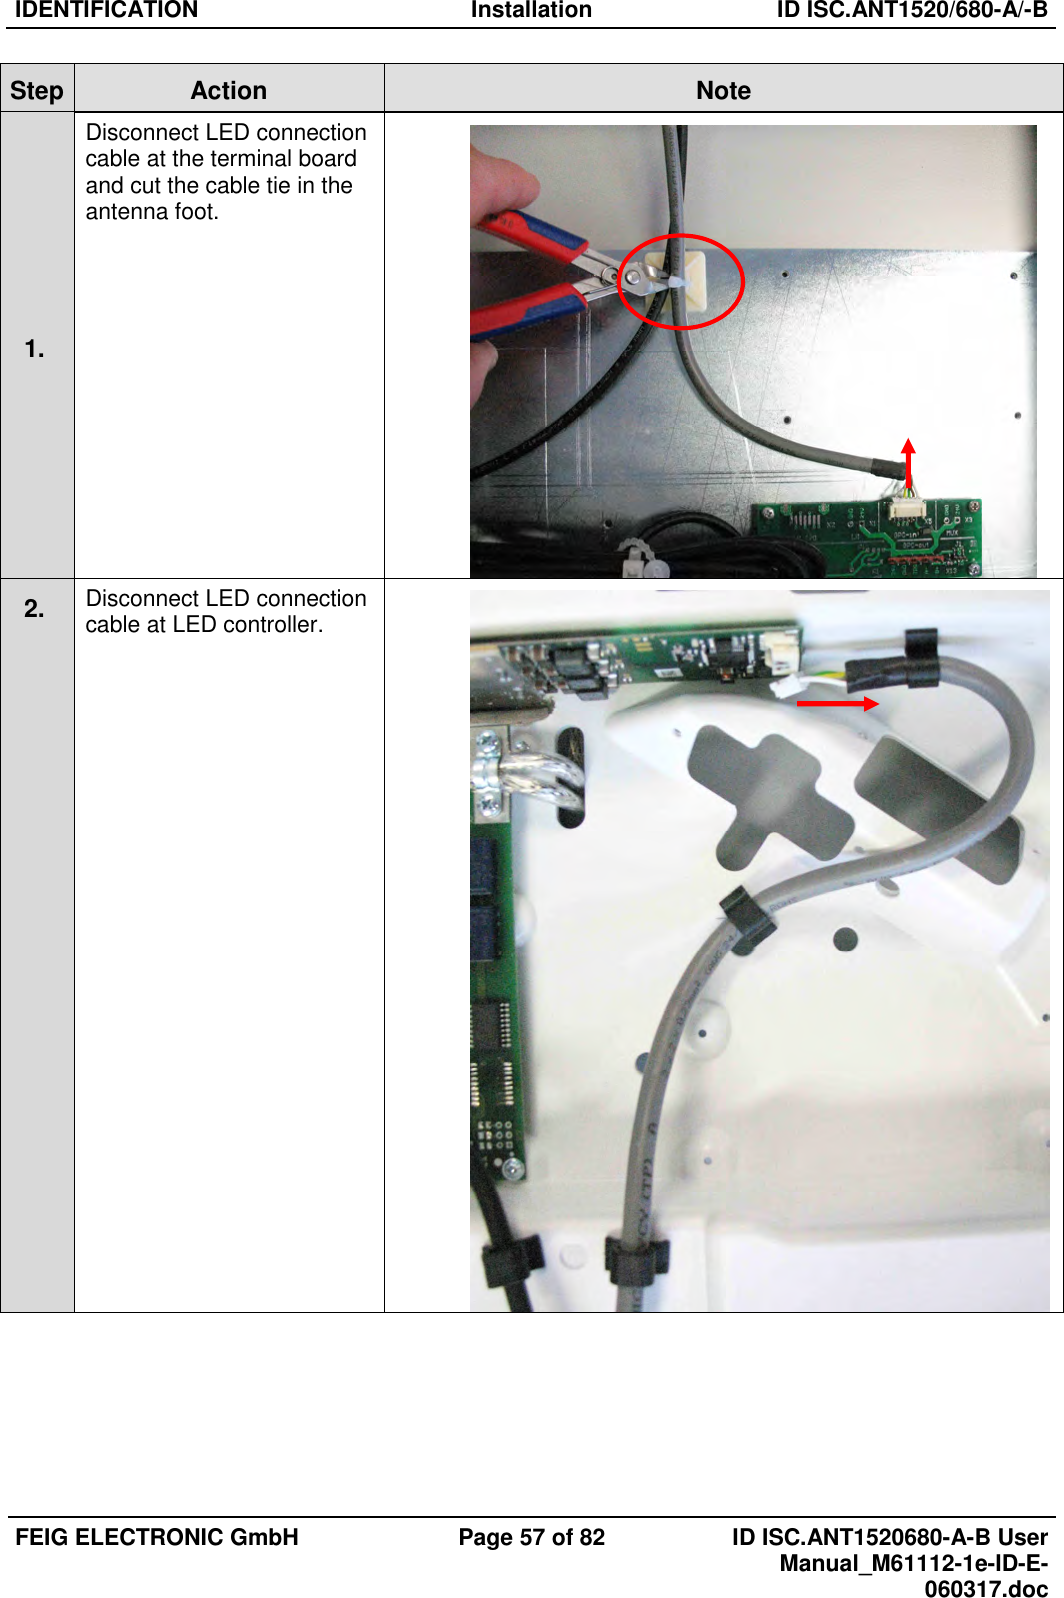 IDENTIFICATION  Installation  ID ISC.ANT1520/680-A/-B  FEIG ELECTRONIC GmbH  Page 57 of 82  ID ISC.ANT1520680-A-B User Manual_M61112-1e-ID-E-060317.doc  Step Action  Note 1.  Disconnect LED connection cable at the terminal board and cut the cable tie in the antenna foot.  2.   Disconnect LED connection cable at LED controller.  